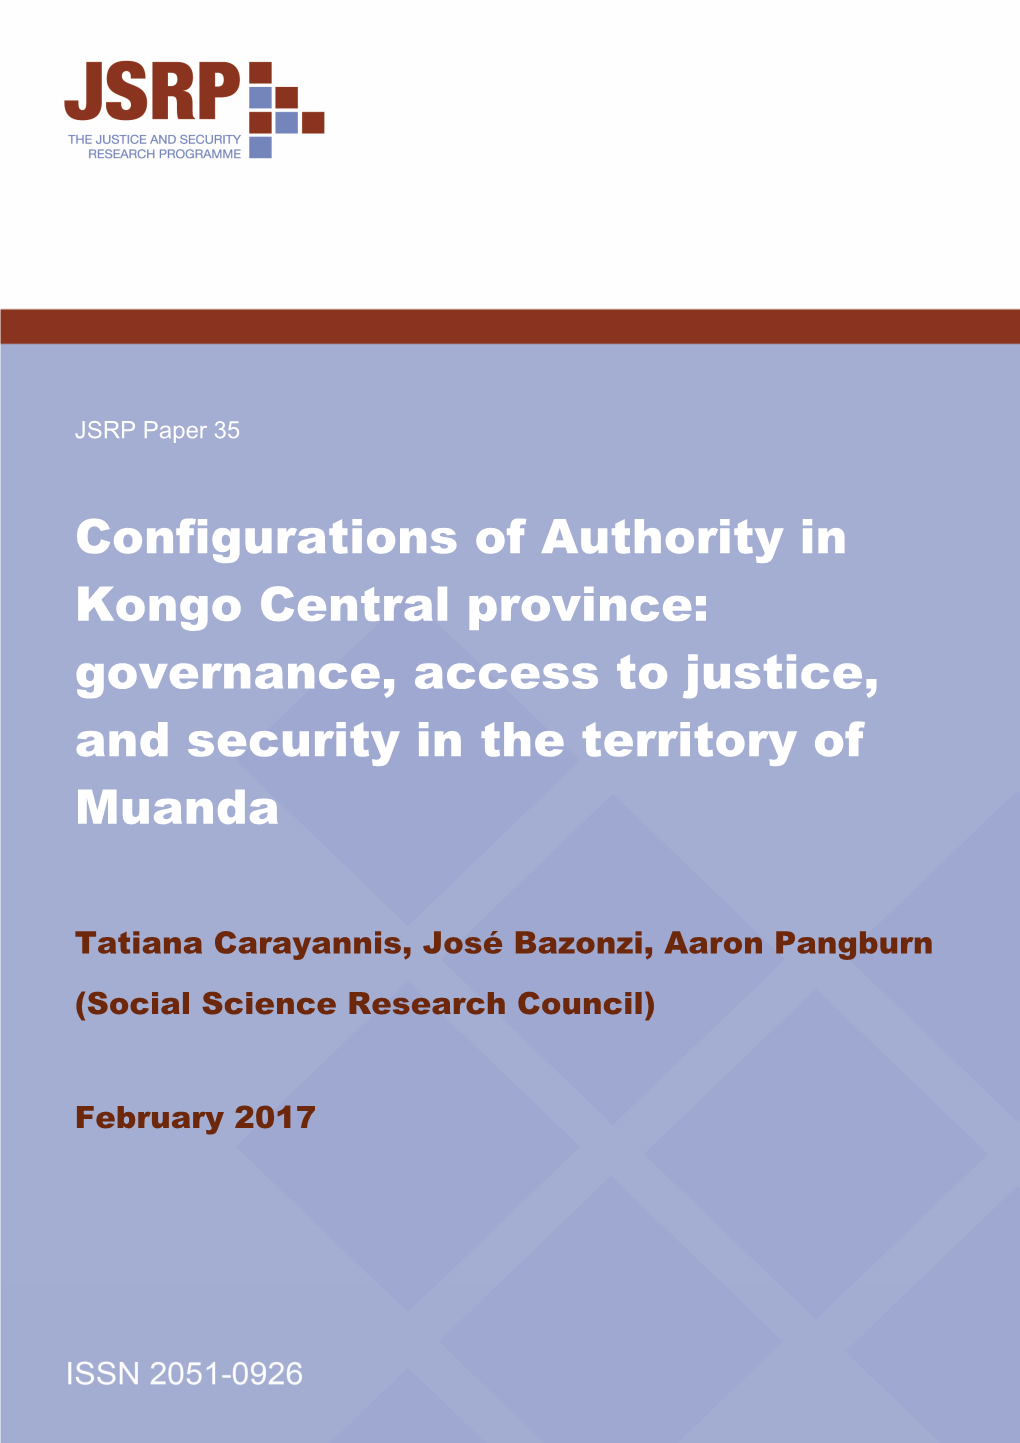 Configurations of Authority in Kongo Central Province: Governance, Access to Justice, and Security in the Territory of Muanda